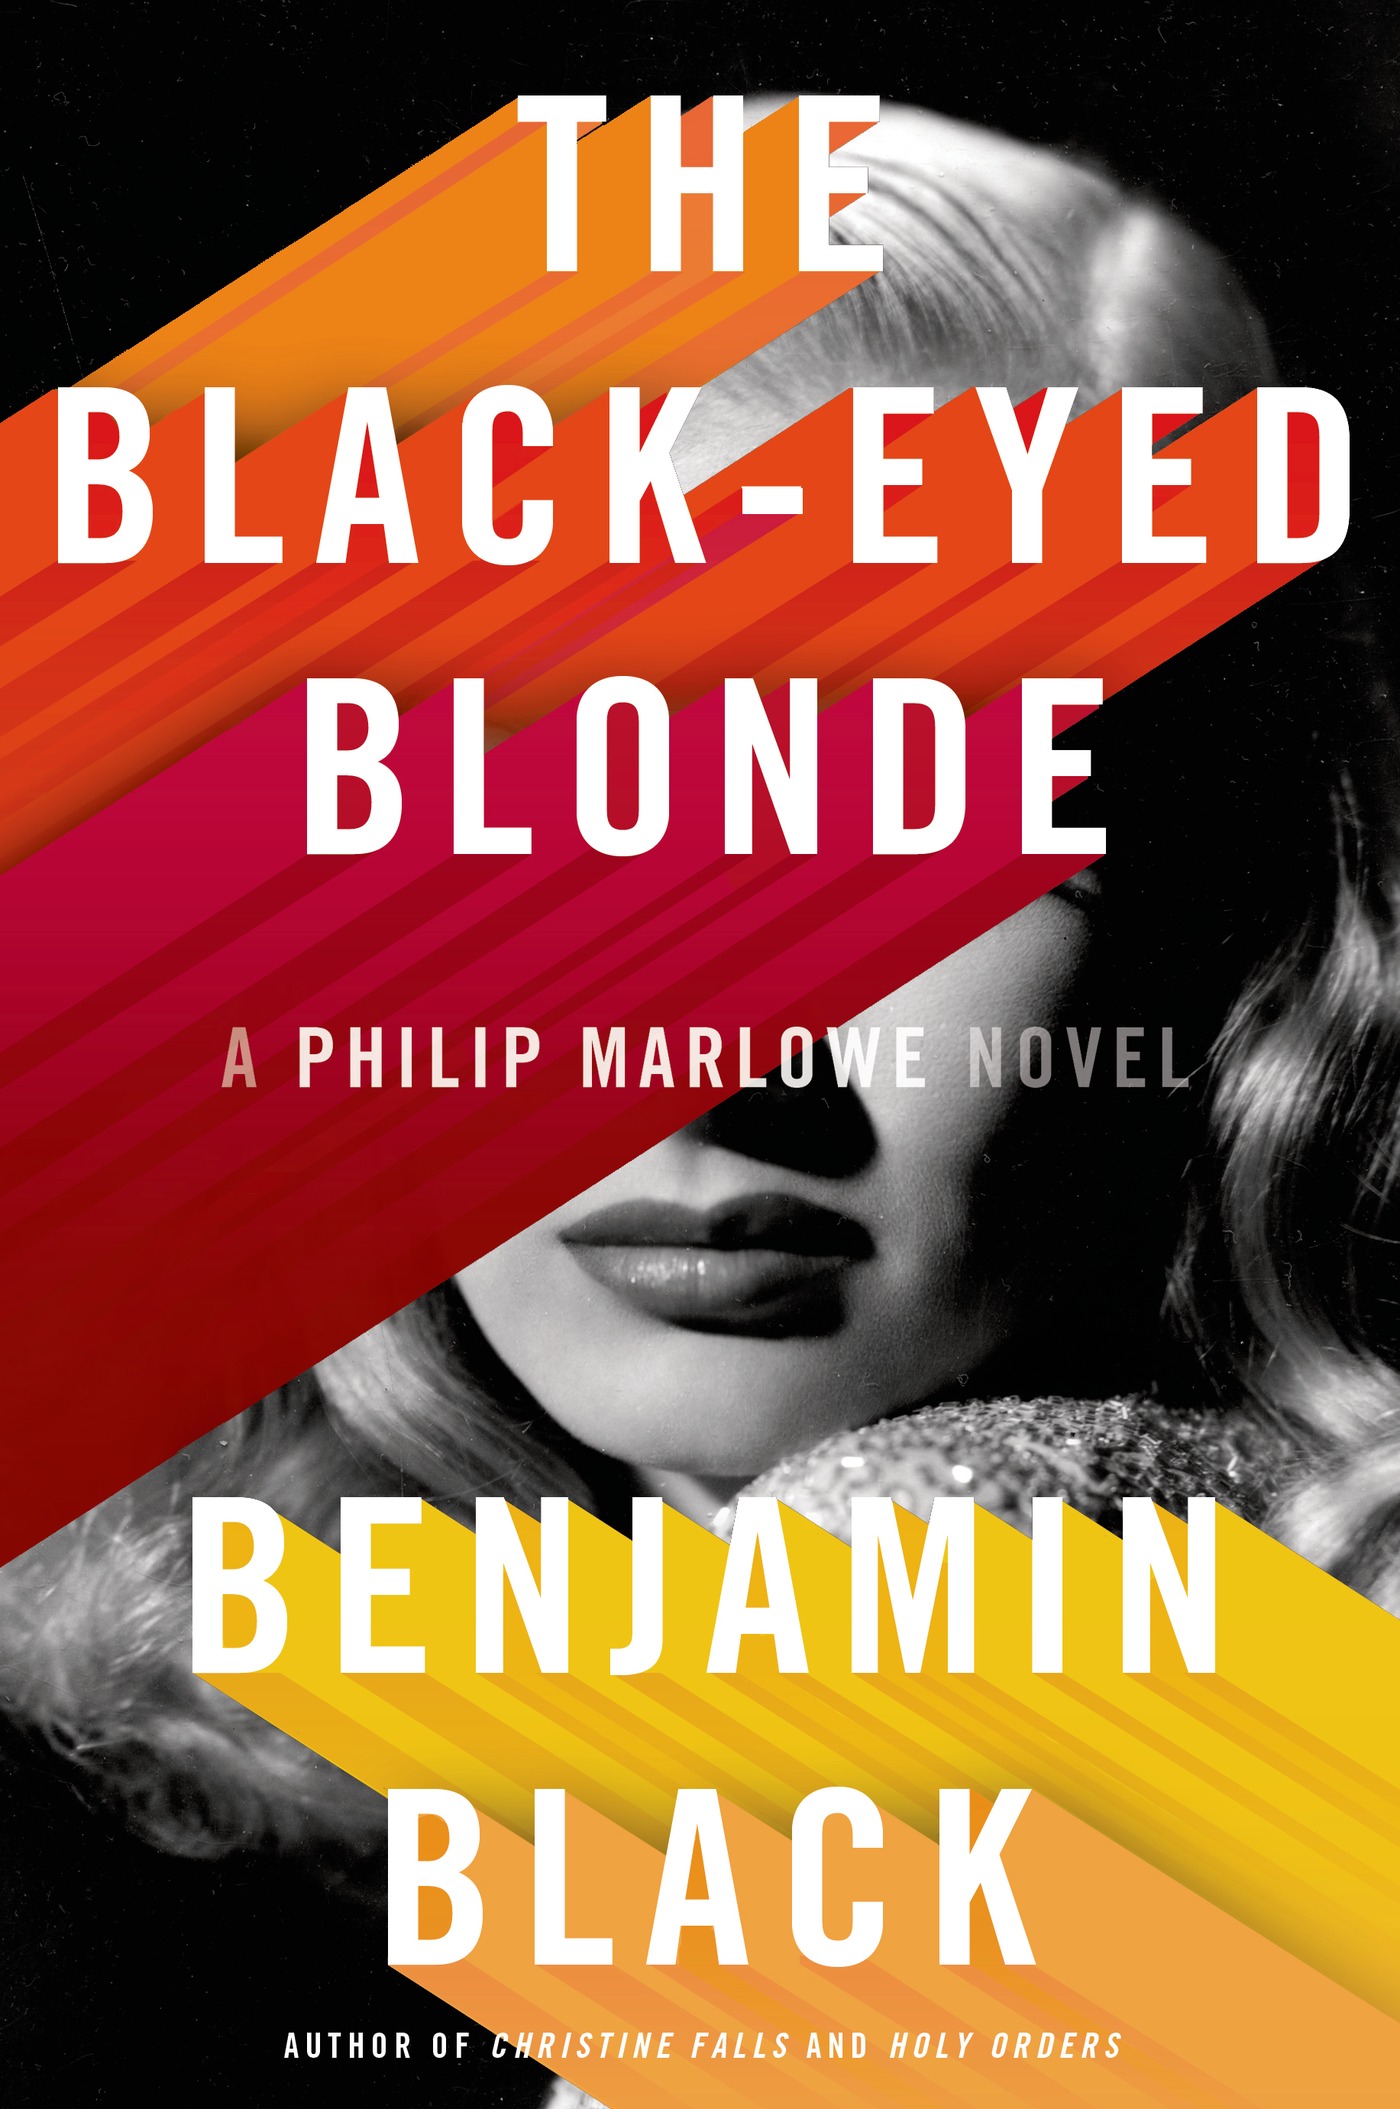 The black-eyed blonde cover image